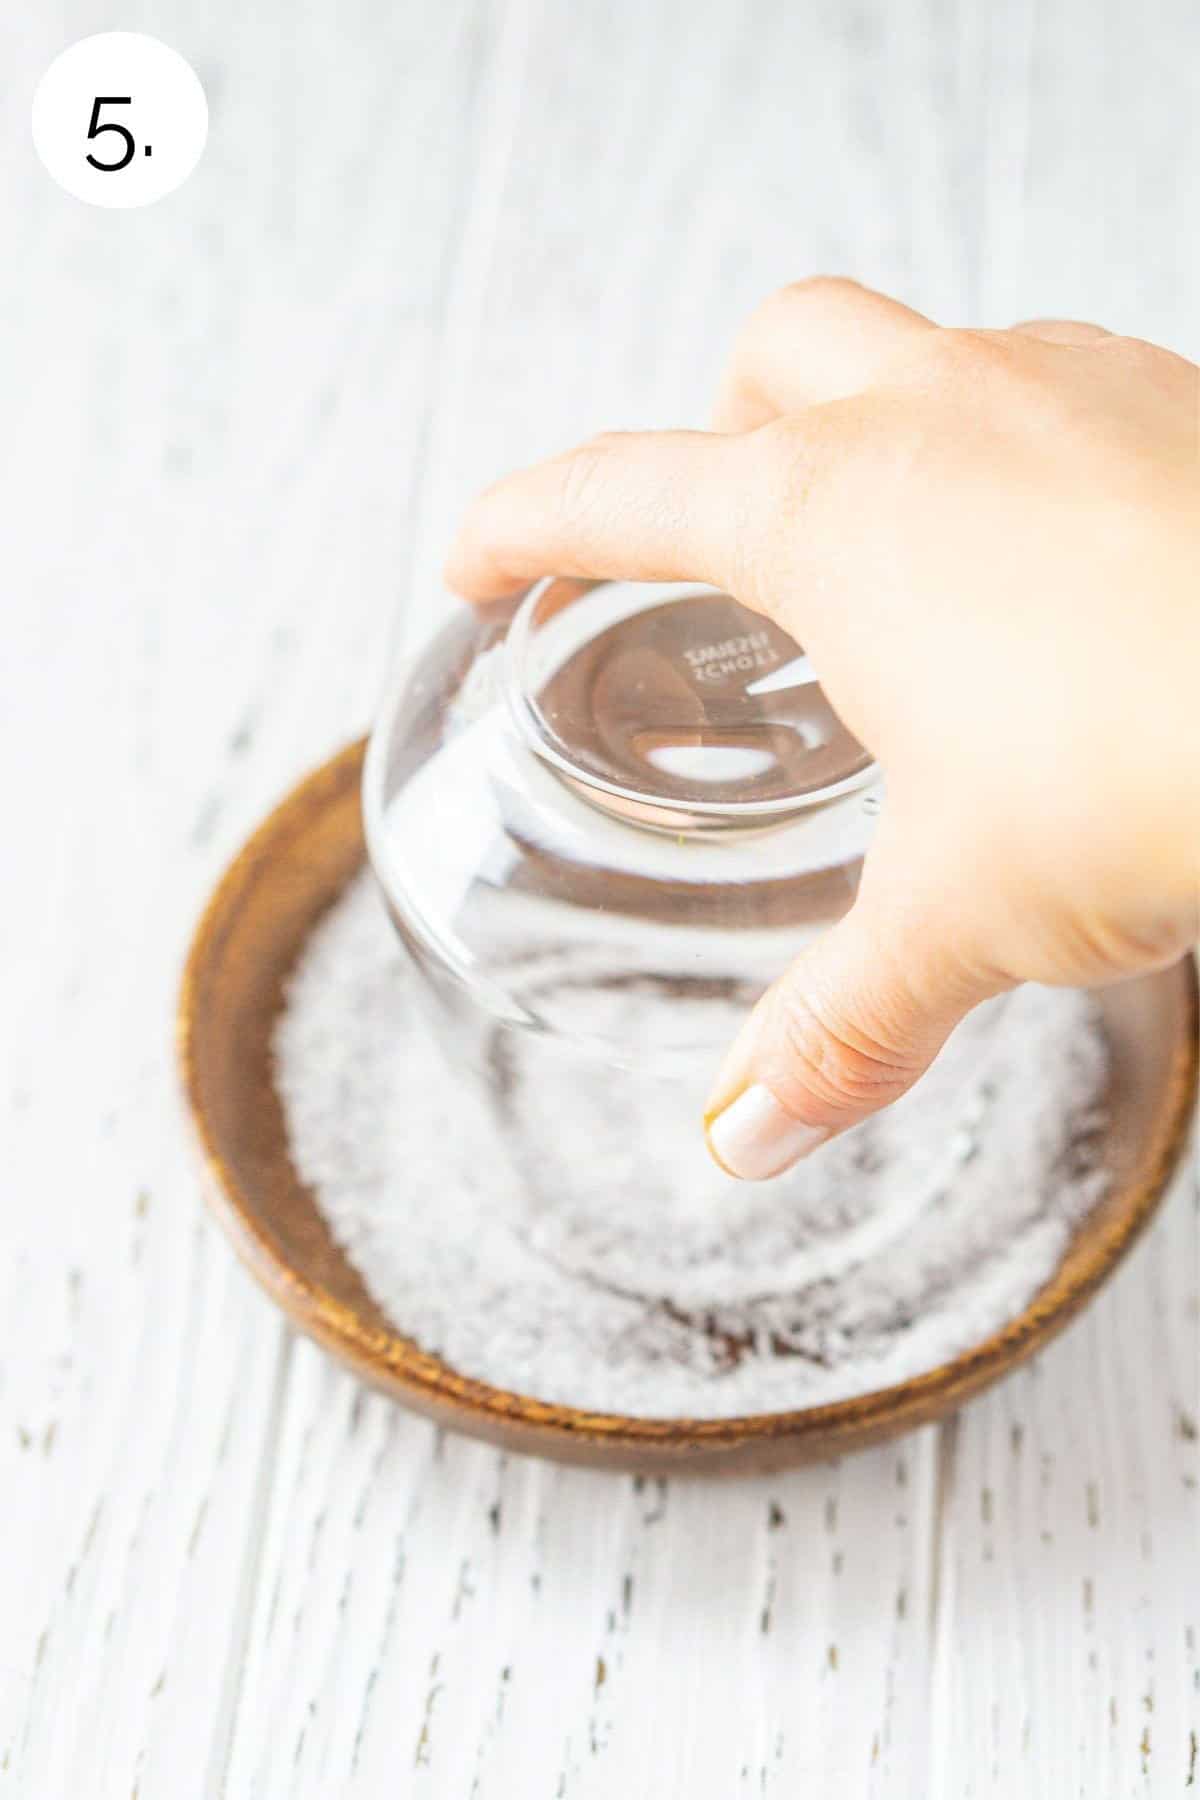 Swirling the glass in sea salt on a small wooden plate.